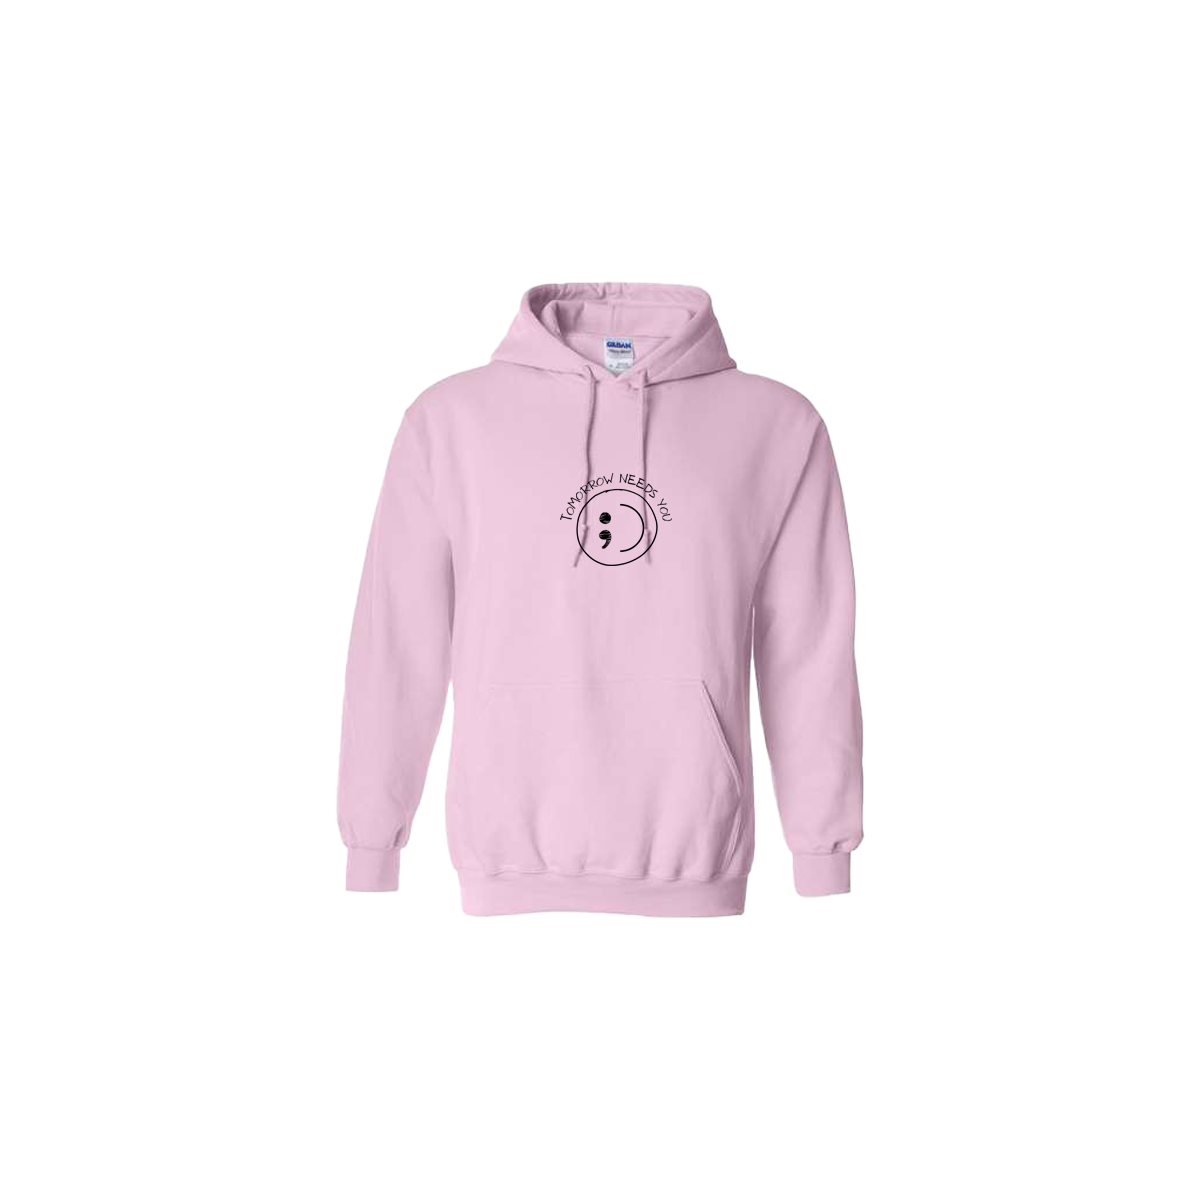 Tomorrow Needs You Embroidered Light Pink Hoodie - Mental Health Awareness Clothing